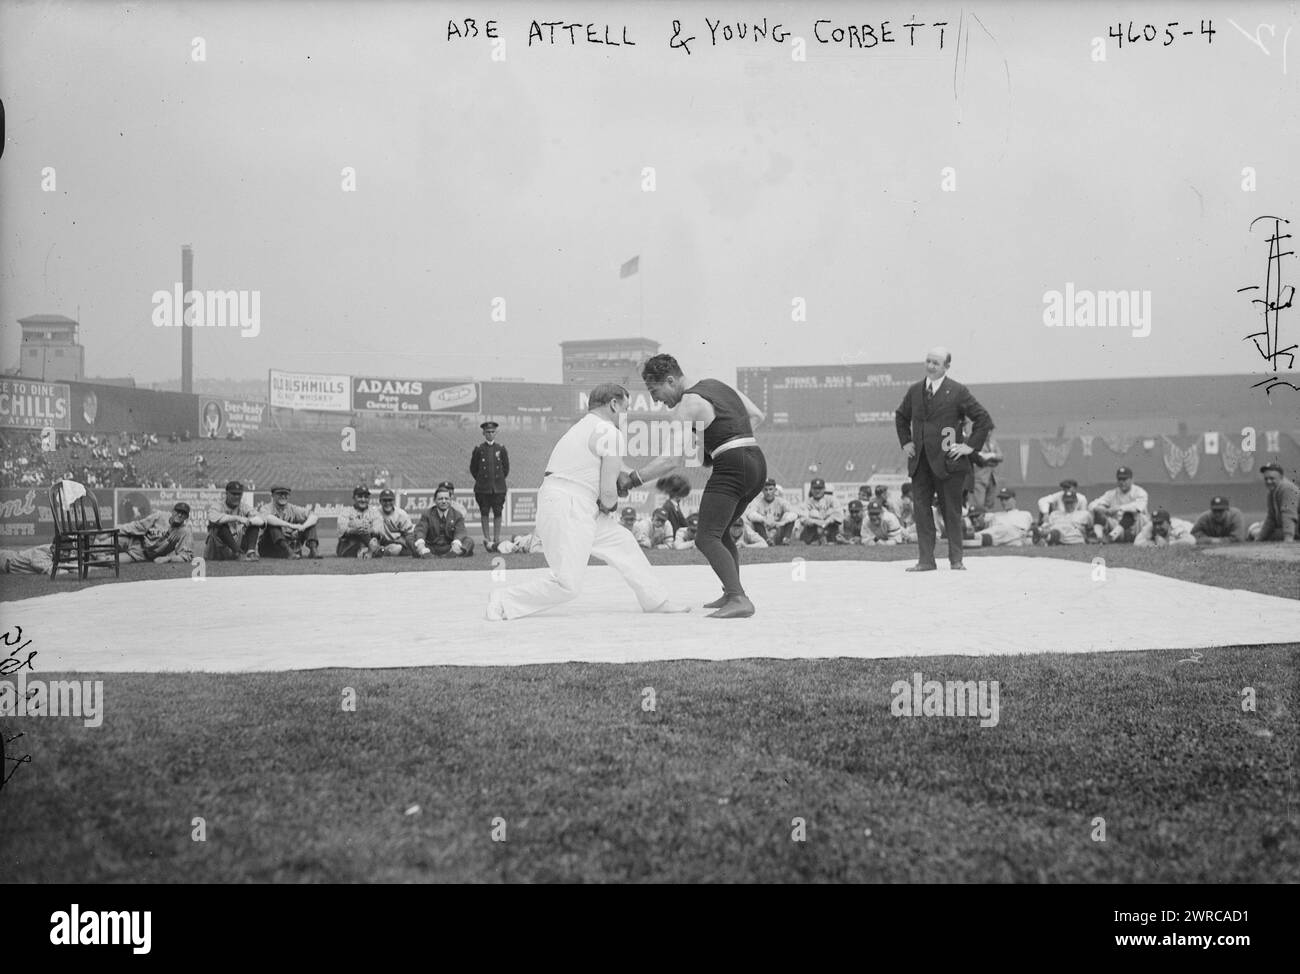 Abe Attell & Young Corbett, Photograph shows Attell and Corbett wrestling on a mat, part of the pre-game entertainment for the Cleveland Indians vs. the New York Yankees game at the Polo Grounds, New York City, May 27, 1918., 1918 May 28, Glass negatives, 1 negative: glass Stock Photo